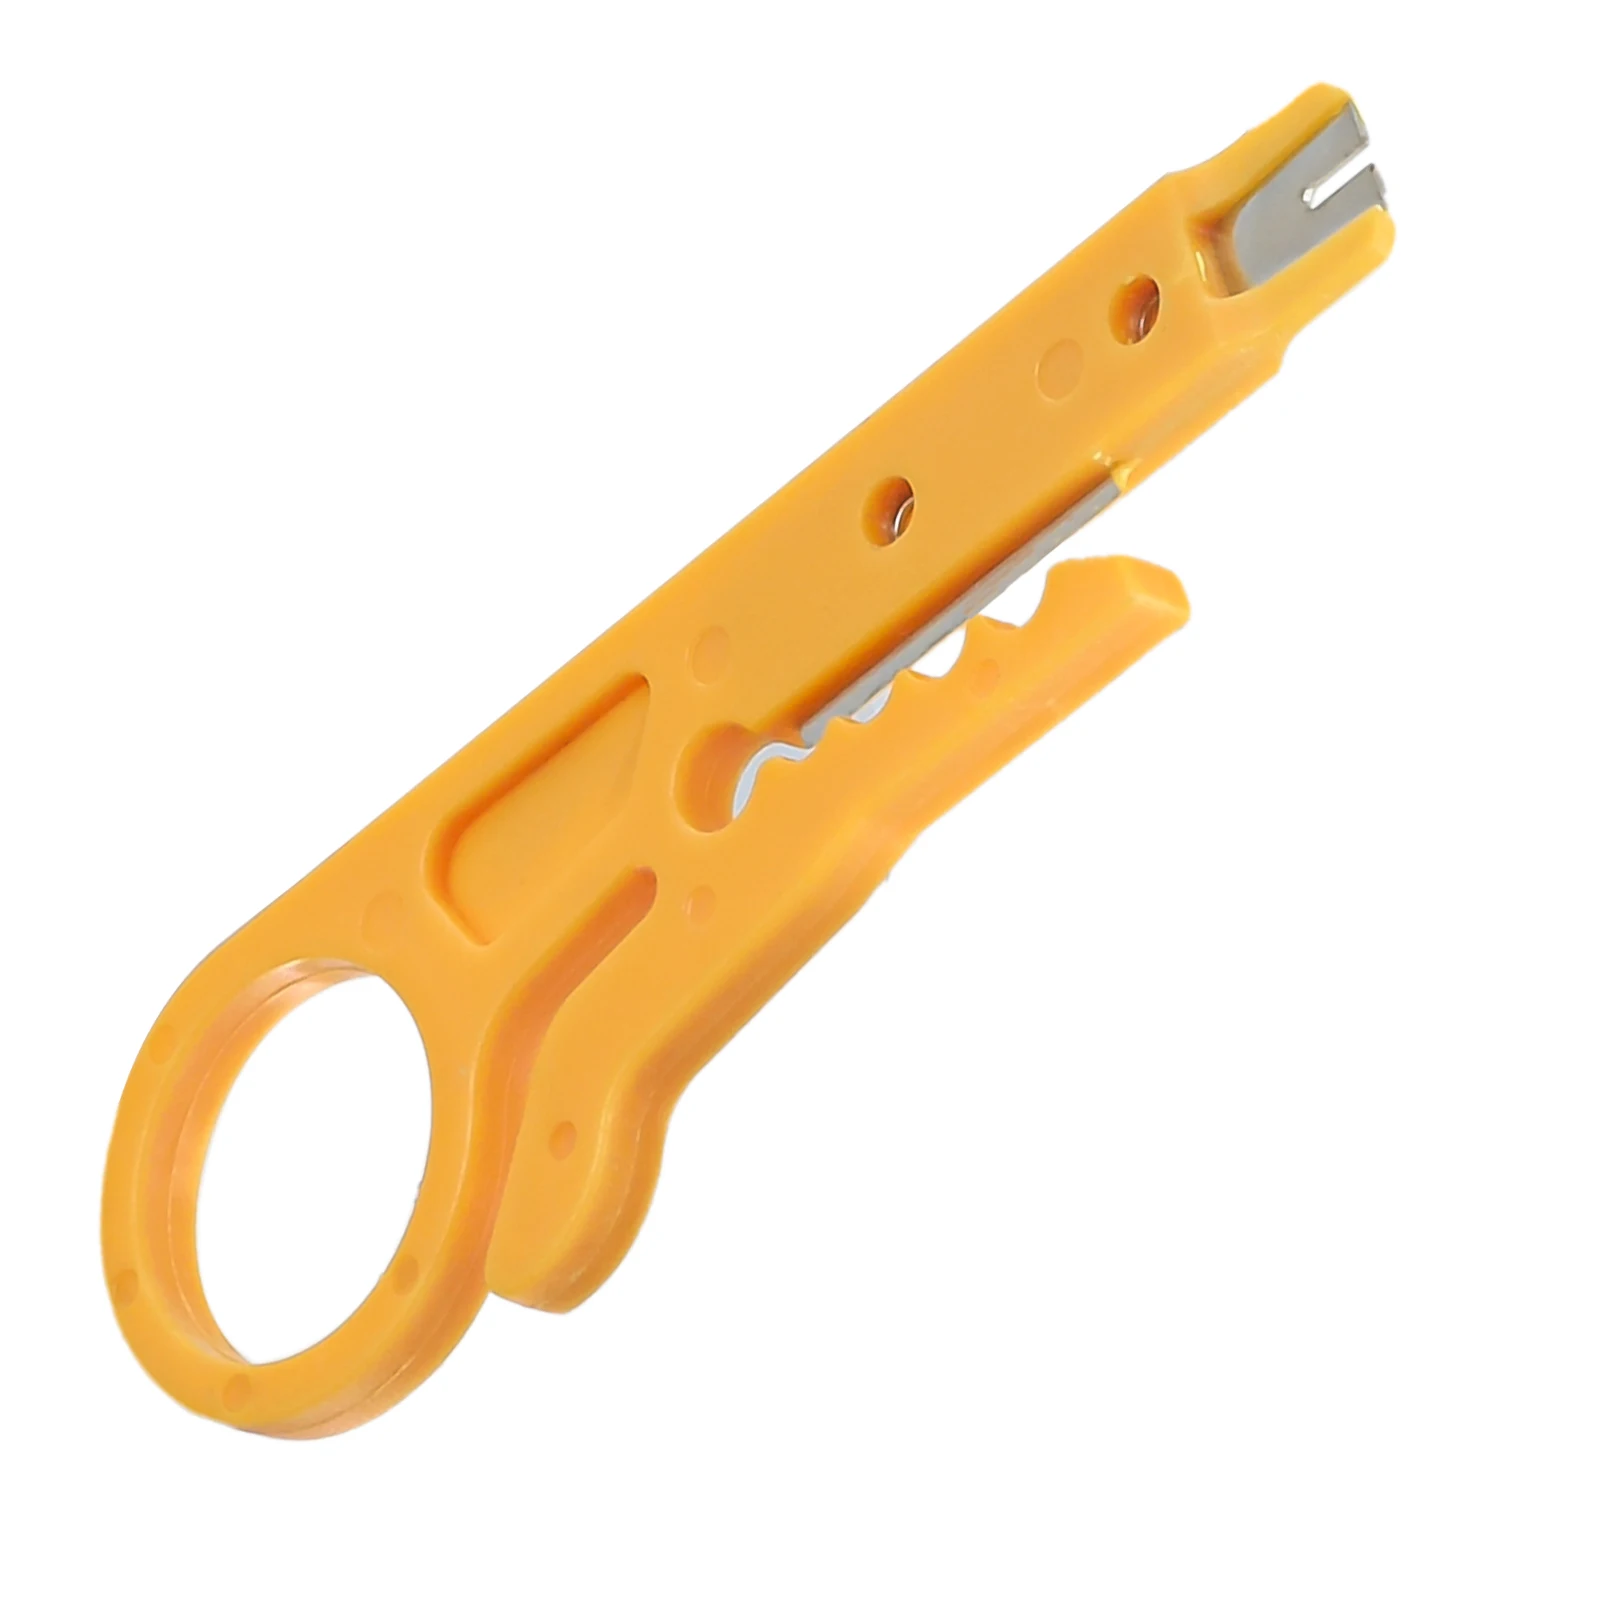 

1pcs Wire Cutter 9cm Connectors Die Cut Wire Electric Wire Stripper Safety Strip Twisted-pair UTP/STP Data Cables